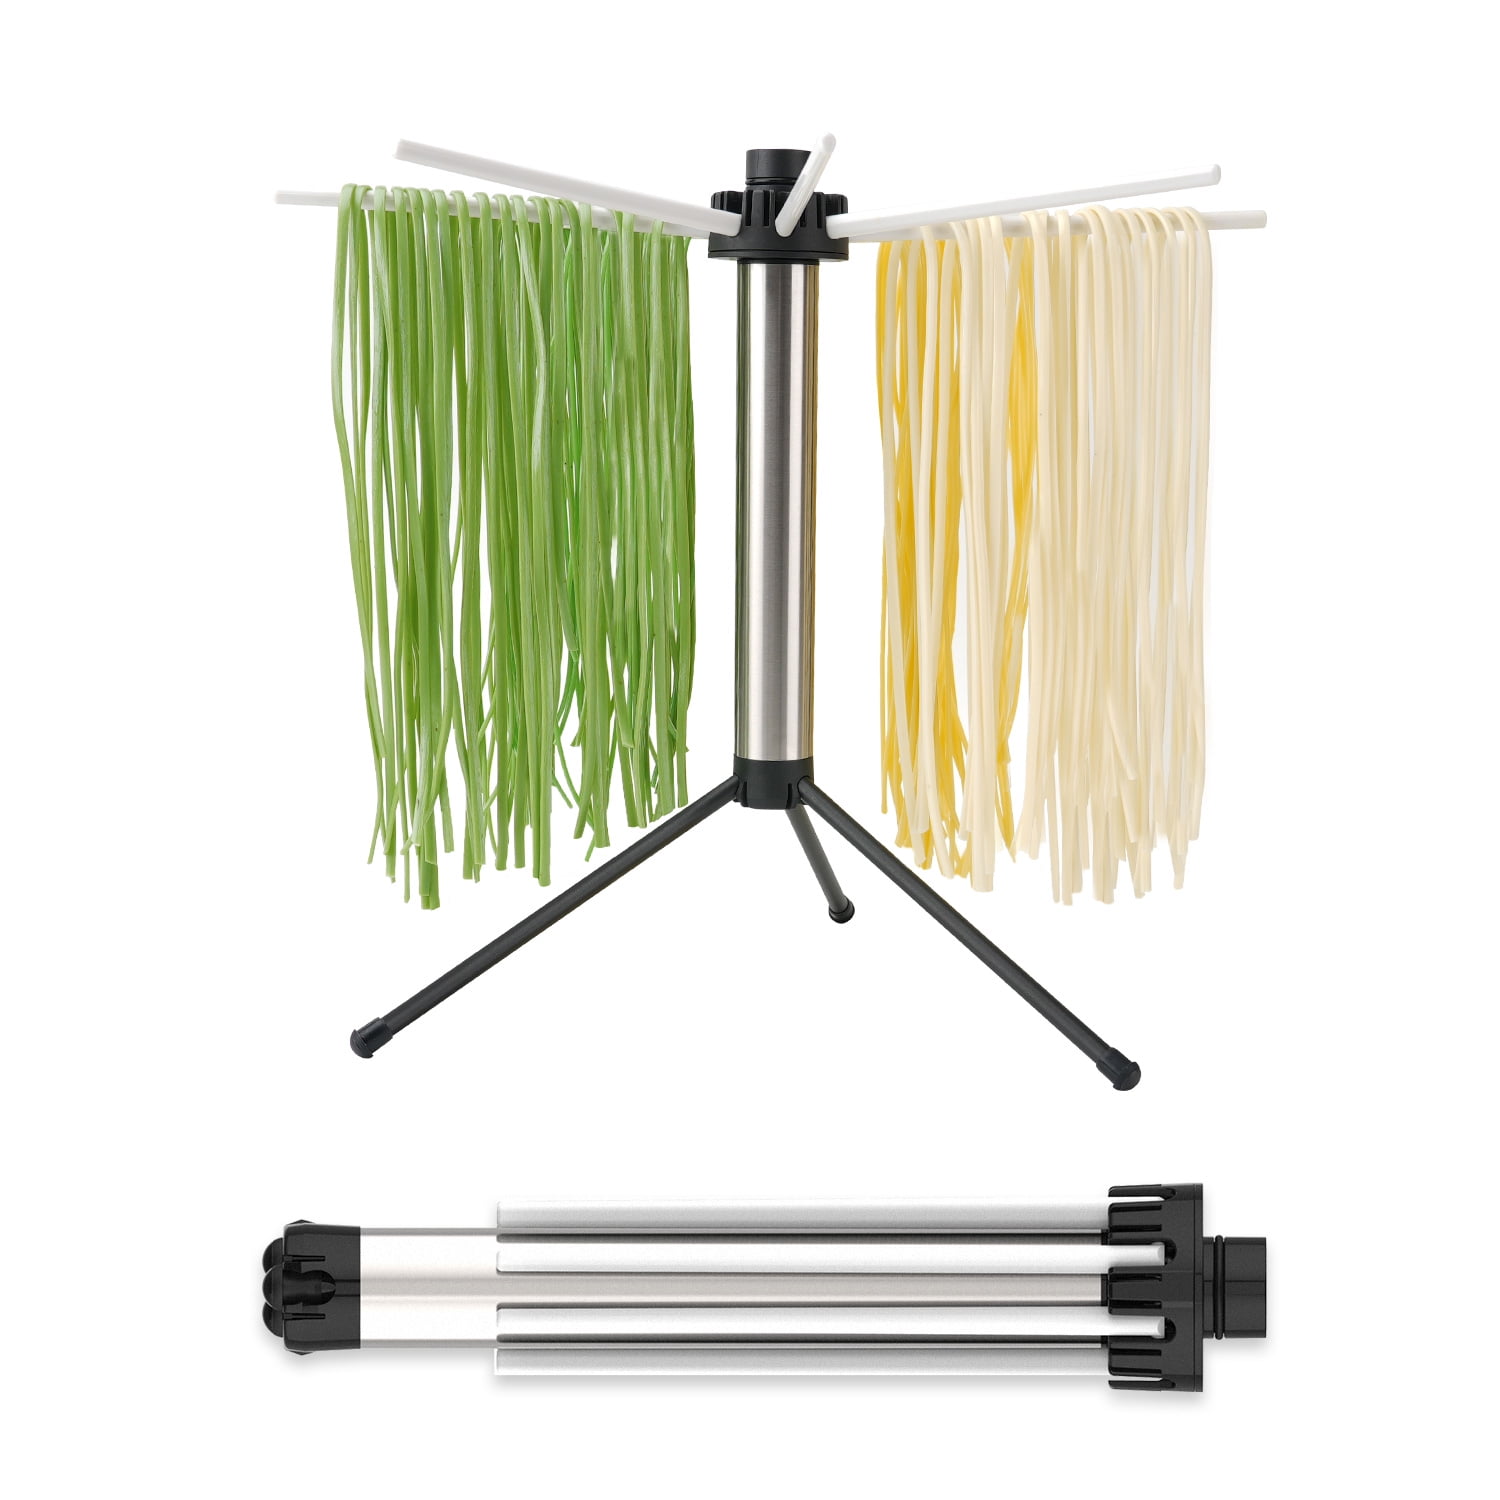 Navaris Collapsible Pasta Drying Rack - Tall Spaghetti Noodle Dryer Stand for Up to 4.5 lbs of Homemade Noodles - Black